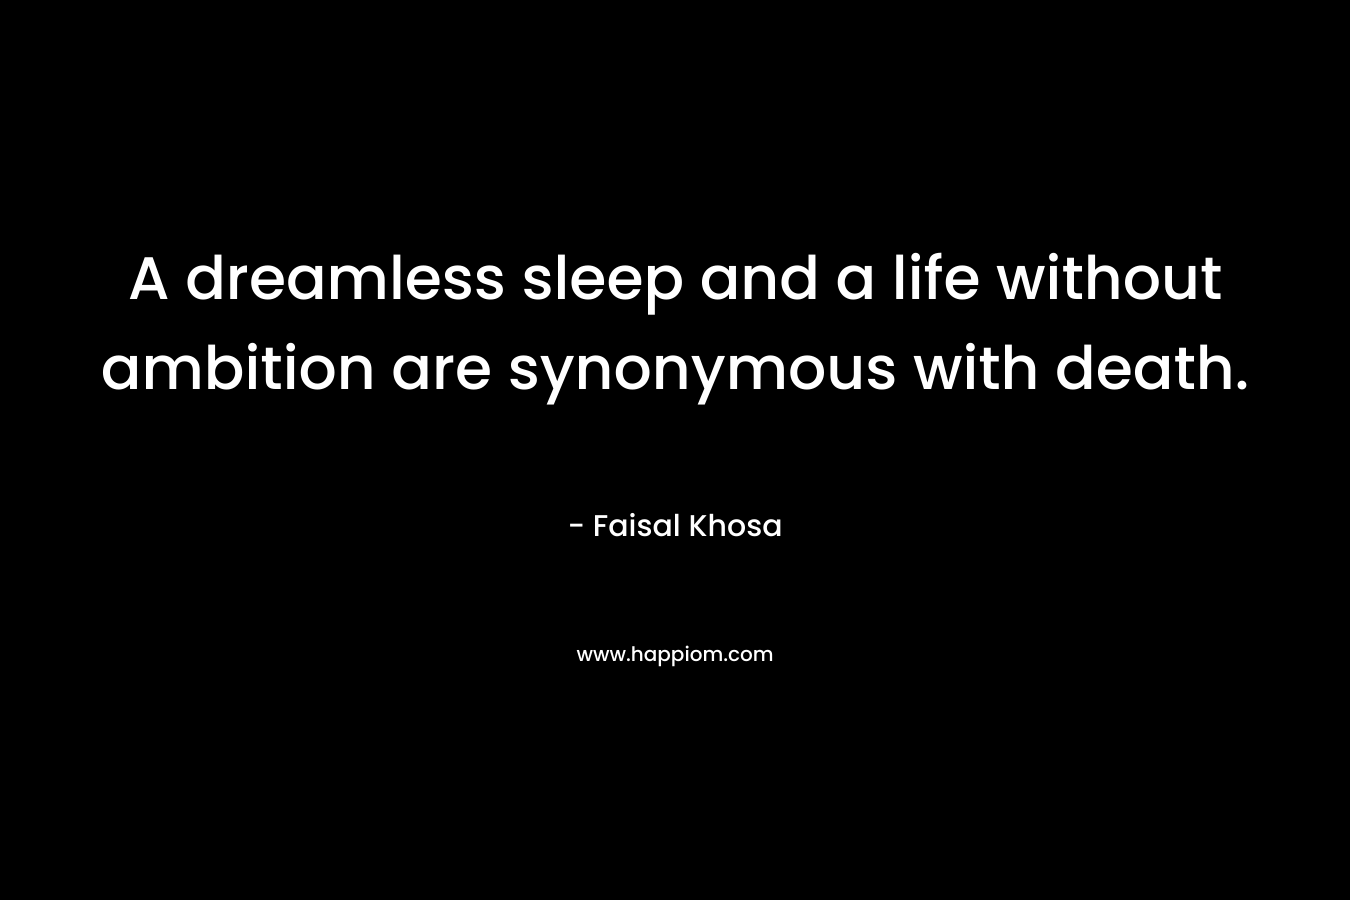 A dreamless sleep and a life without ambition are synonymous with death. – Faisal Khosa